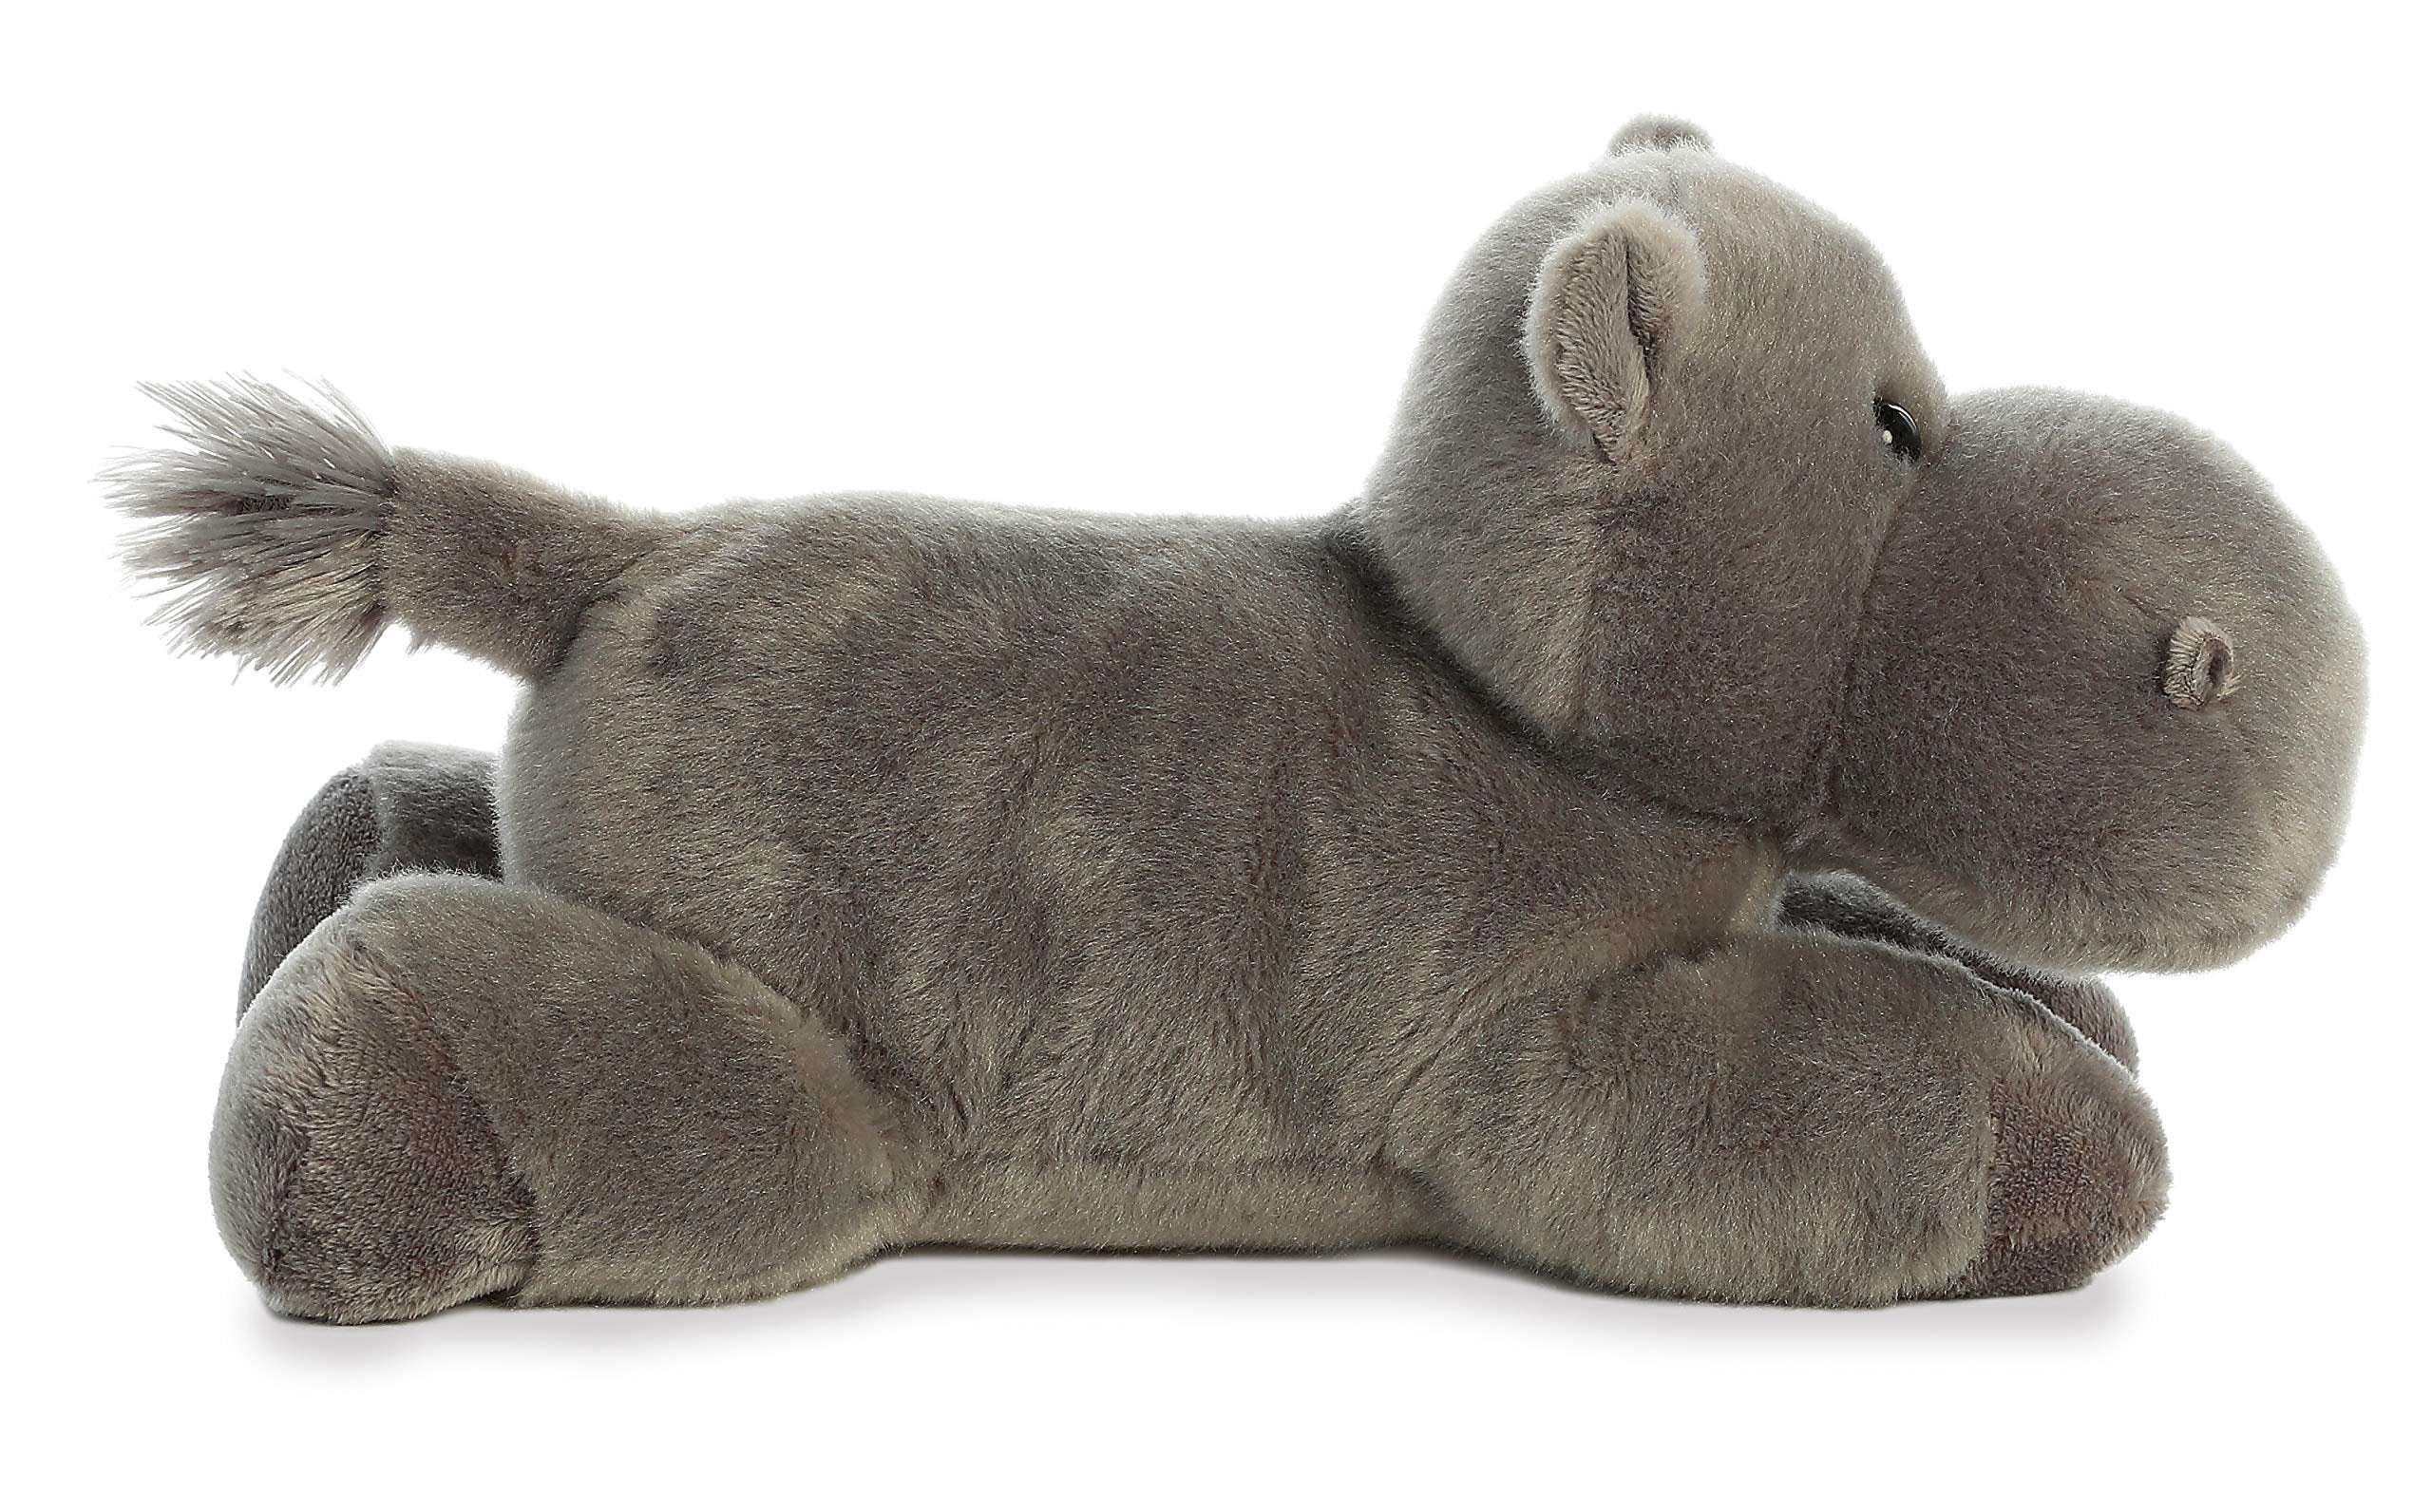 Aurora® Adorable Flopsie™ Howie Hippo™ Stuffed Animal - Playful Ease - Timeless Companions - Gray 12 Inches